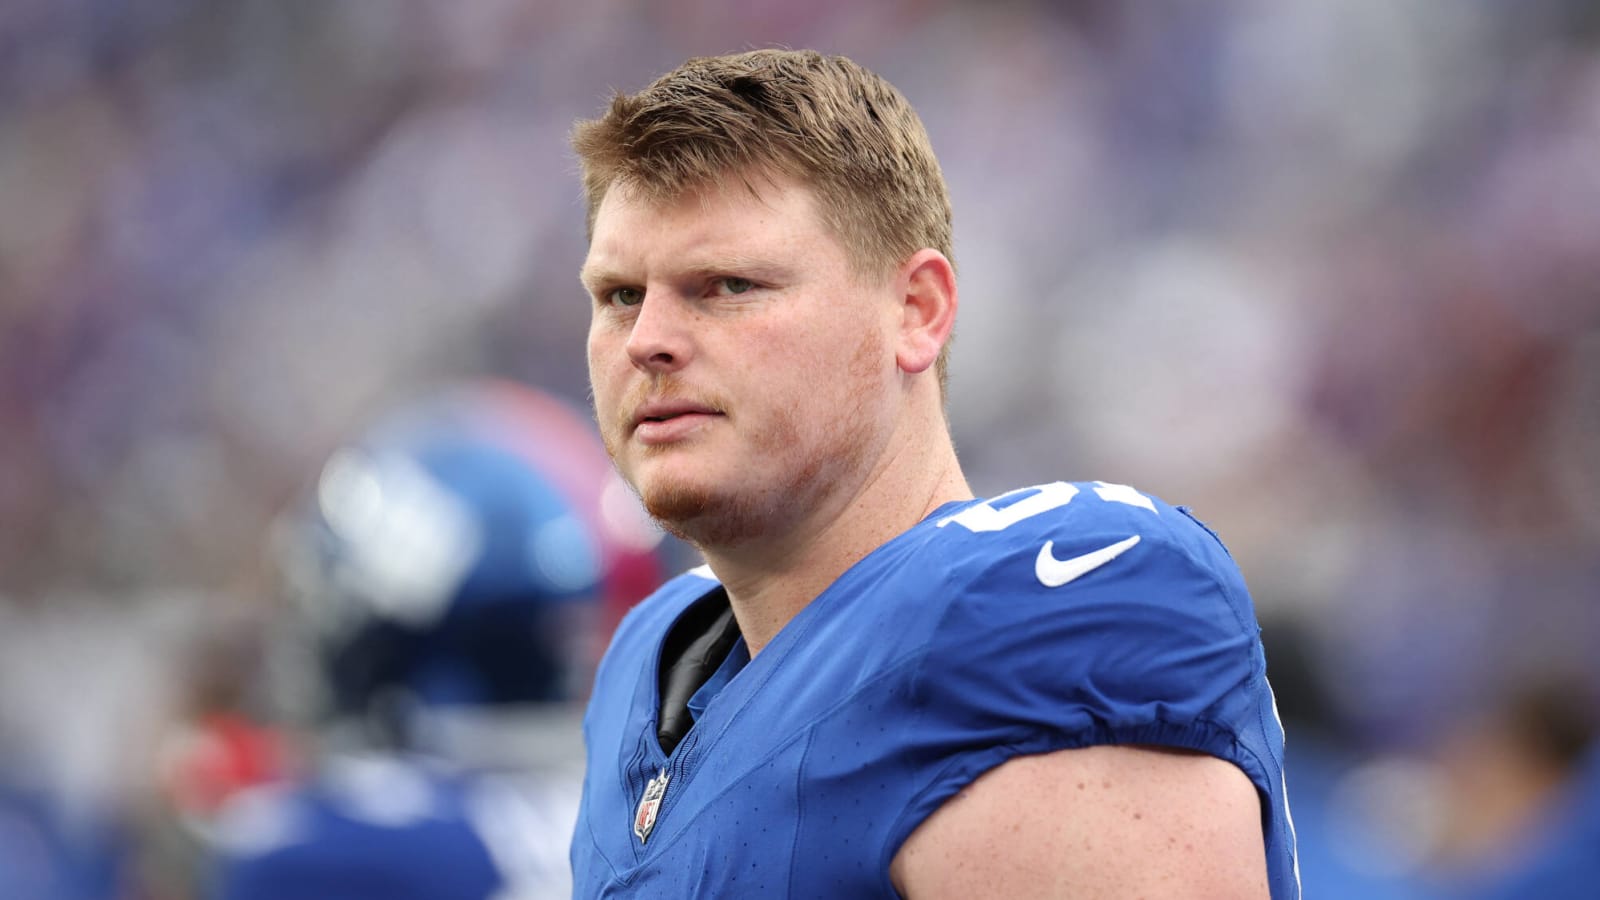 The Giants need a breakout performance from young offensive lineman